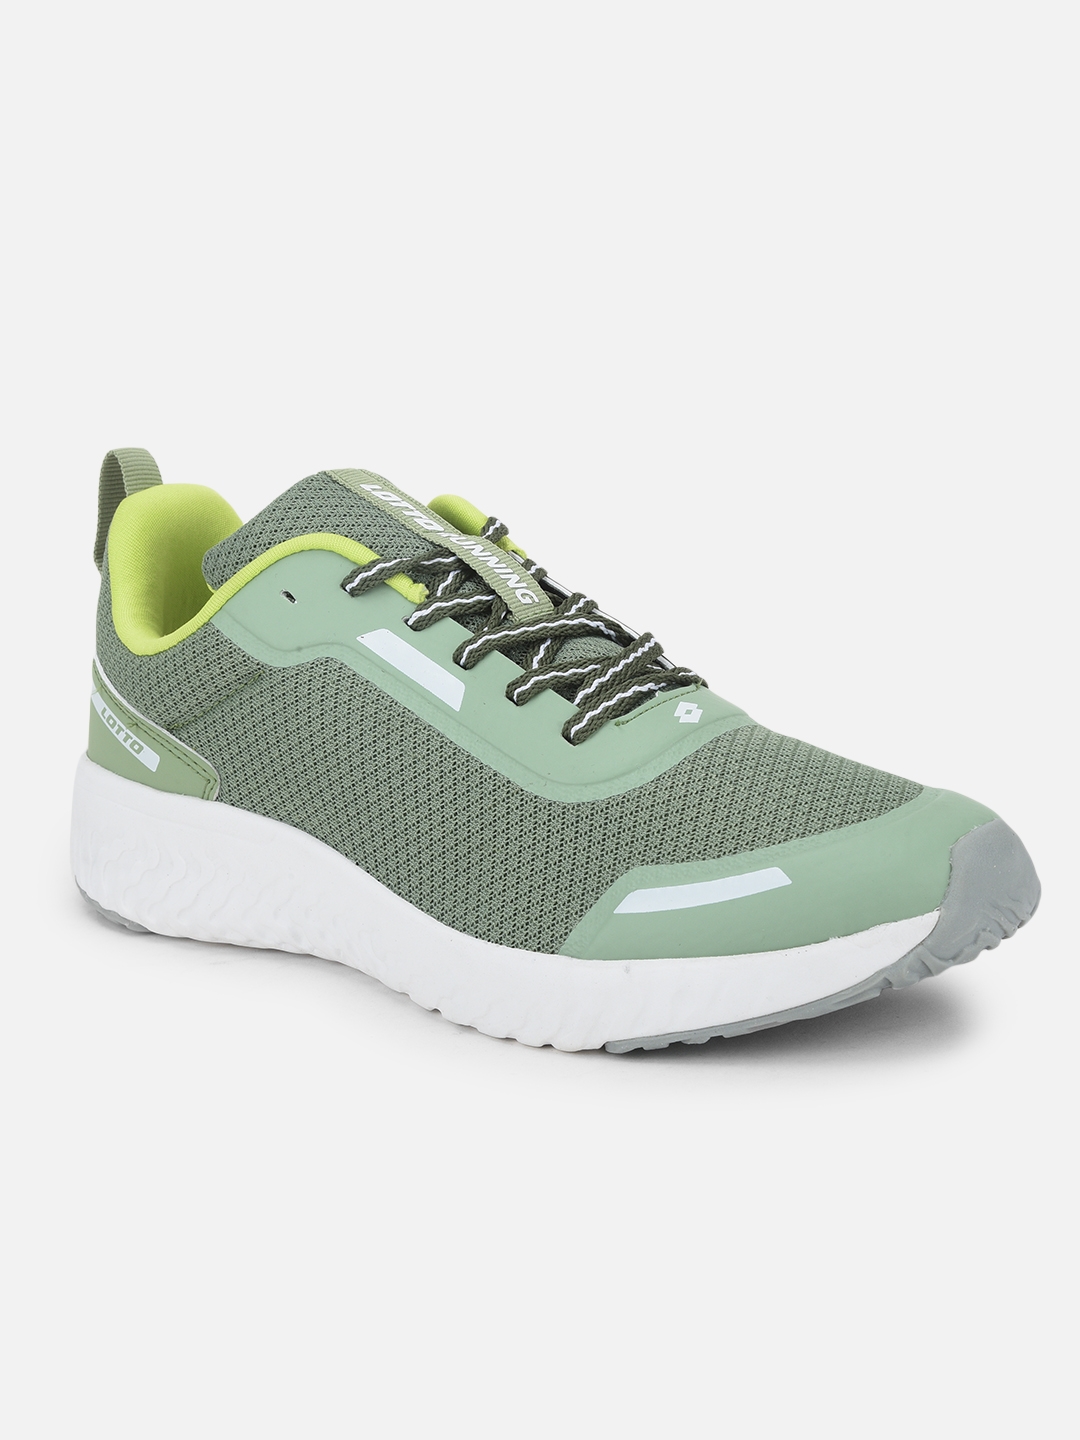 Lotto | LOTTO MAGLI WOMEN LIGHT OLIVE/GREEN RUNNING SHOES